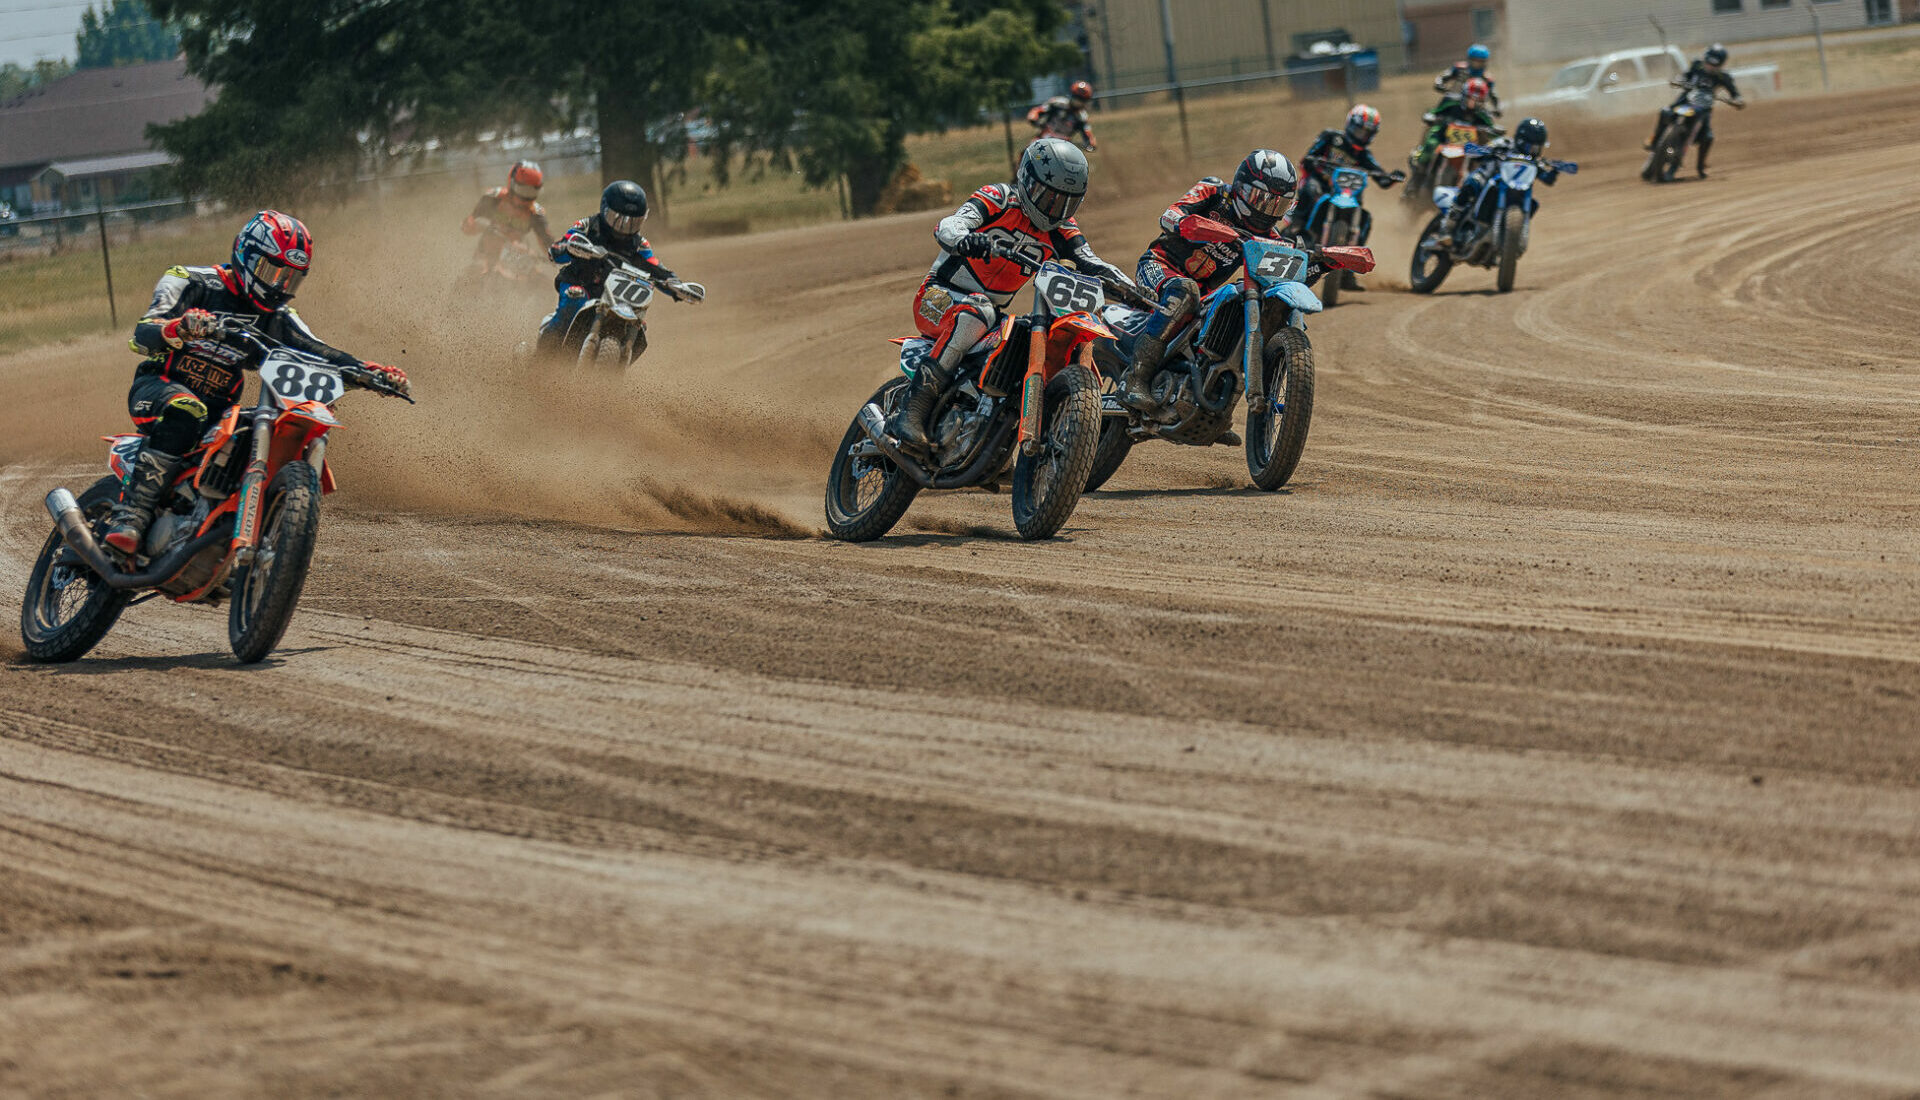 America's premier amateur flat track competition will return to the Du Quoin State Fairgrounds in Du Quoin, Illinois. Photo courtesy AMA.